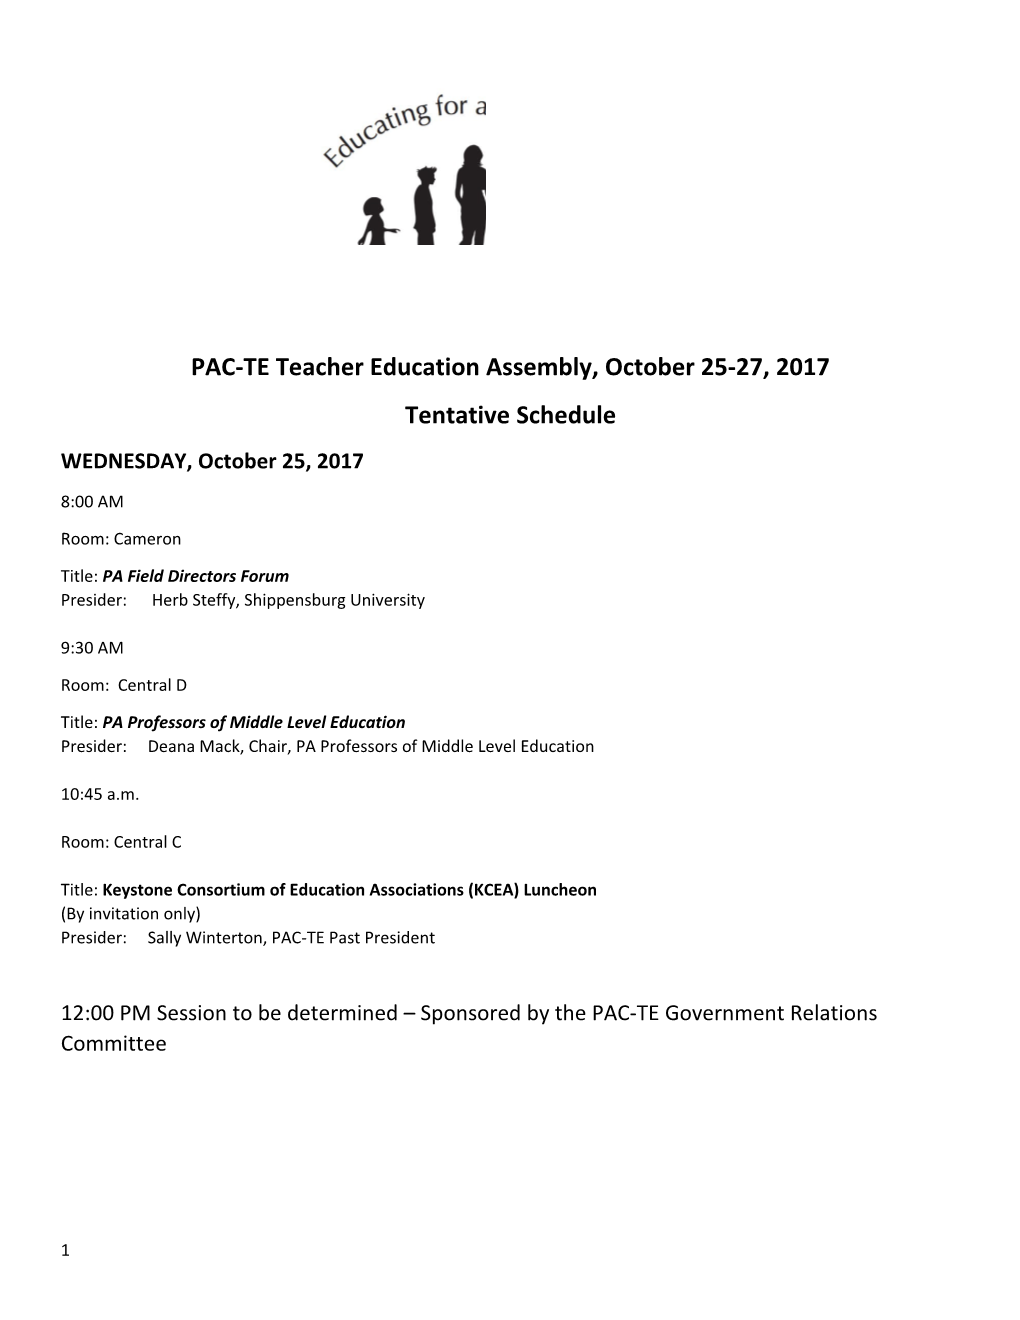 PAC-TE Teacher Education Assembly, October 25-27, 2017